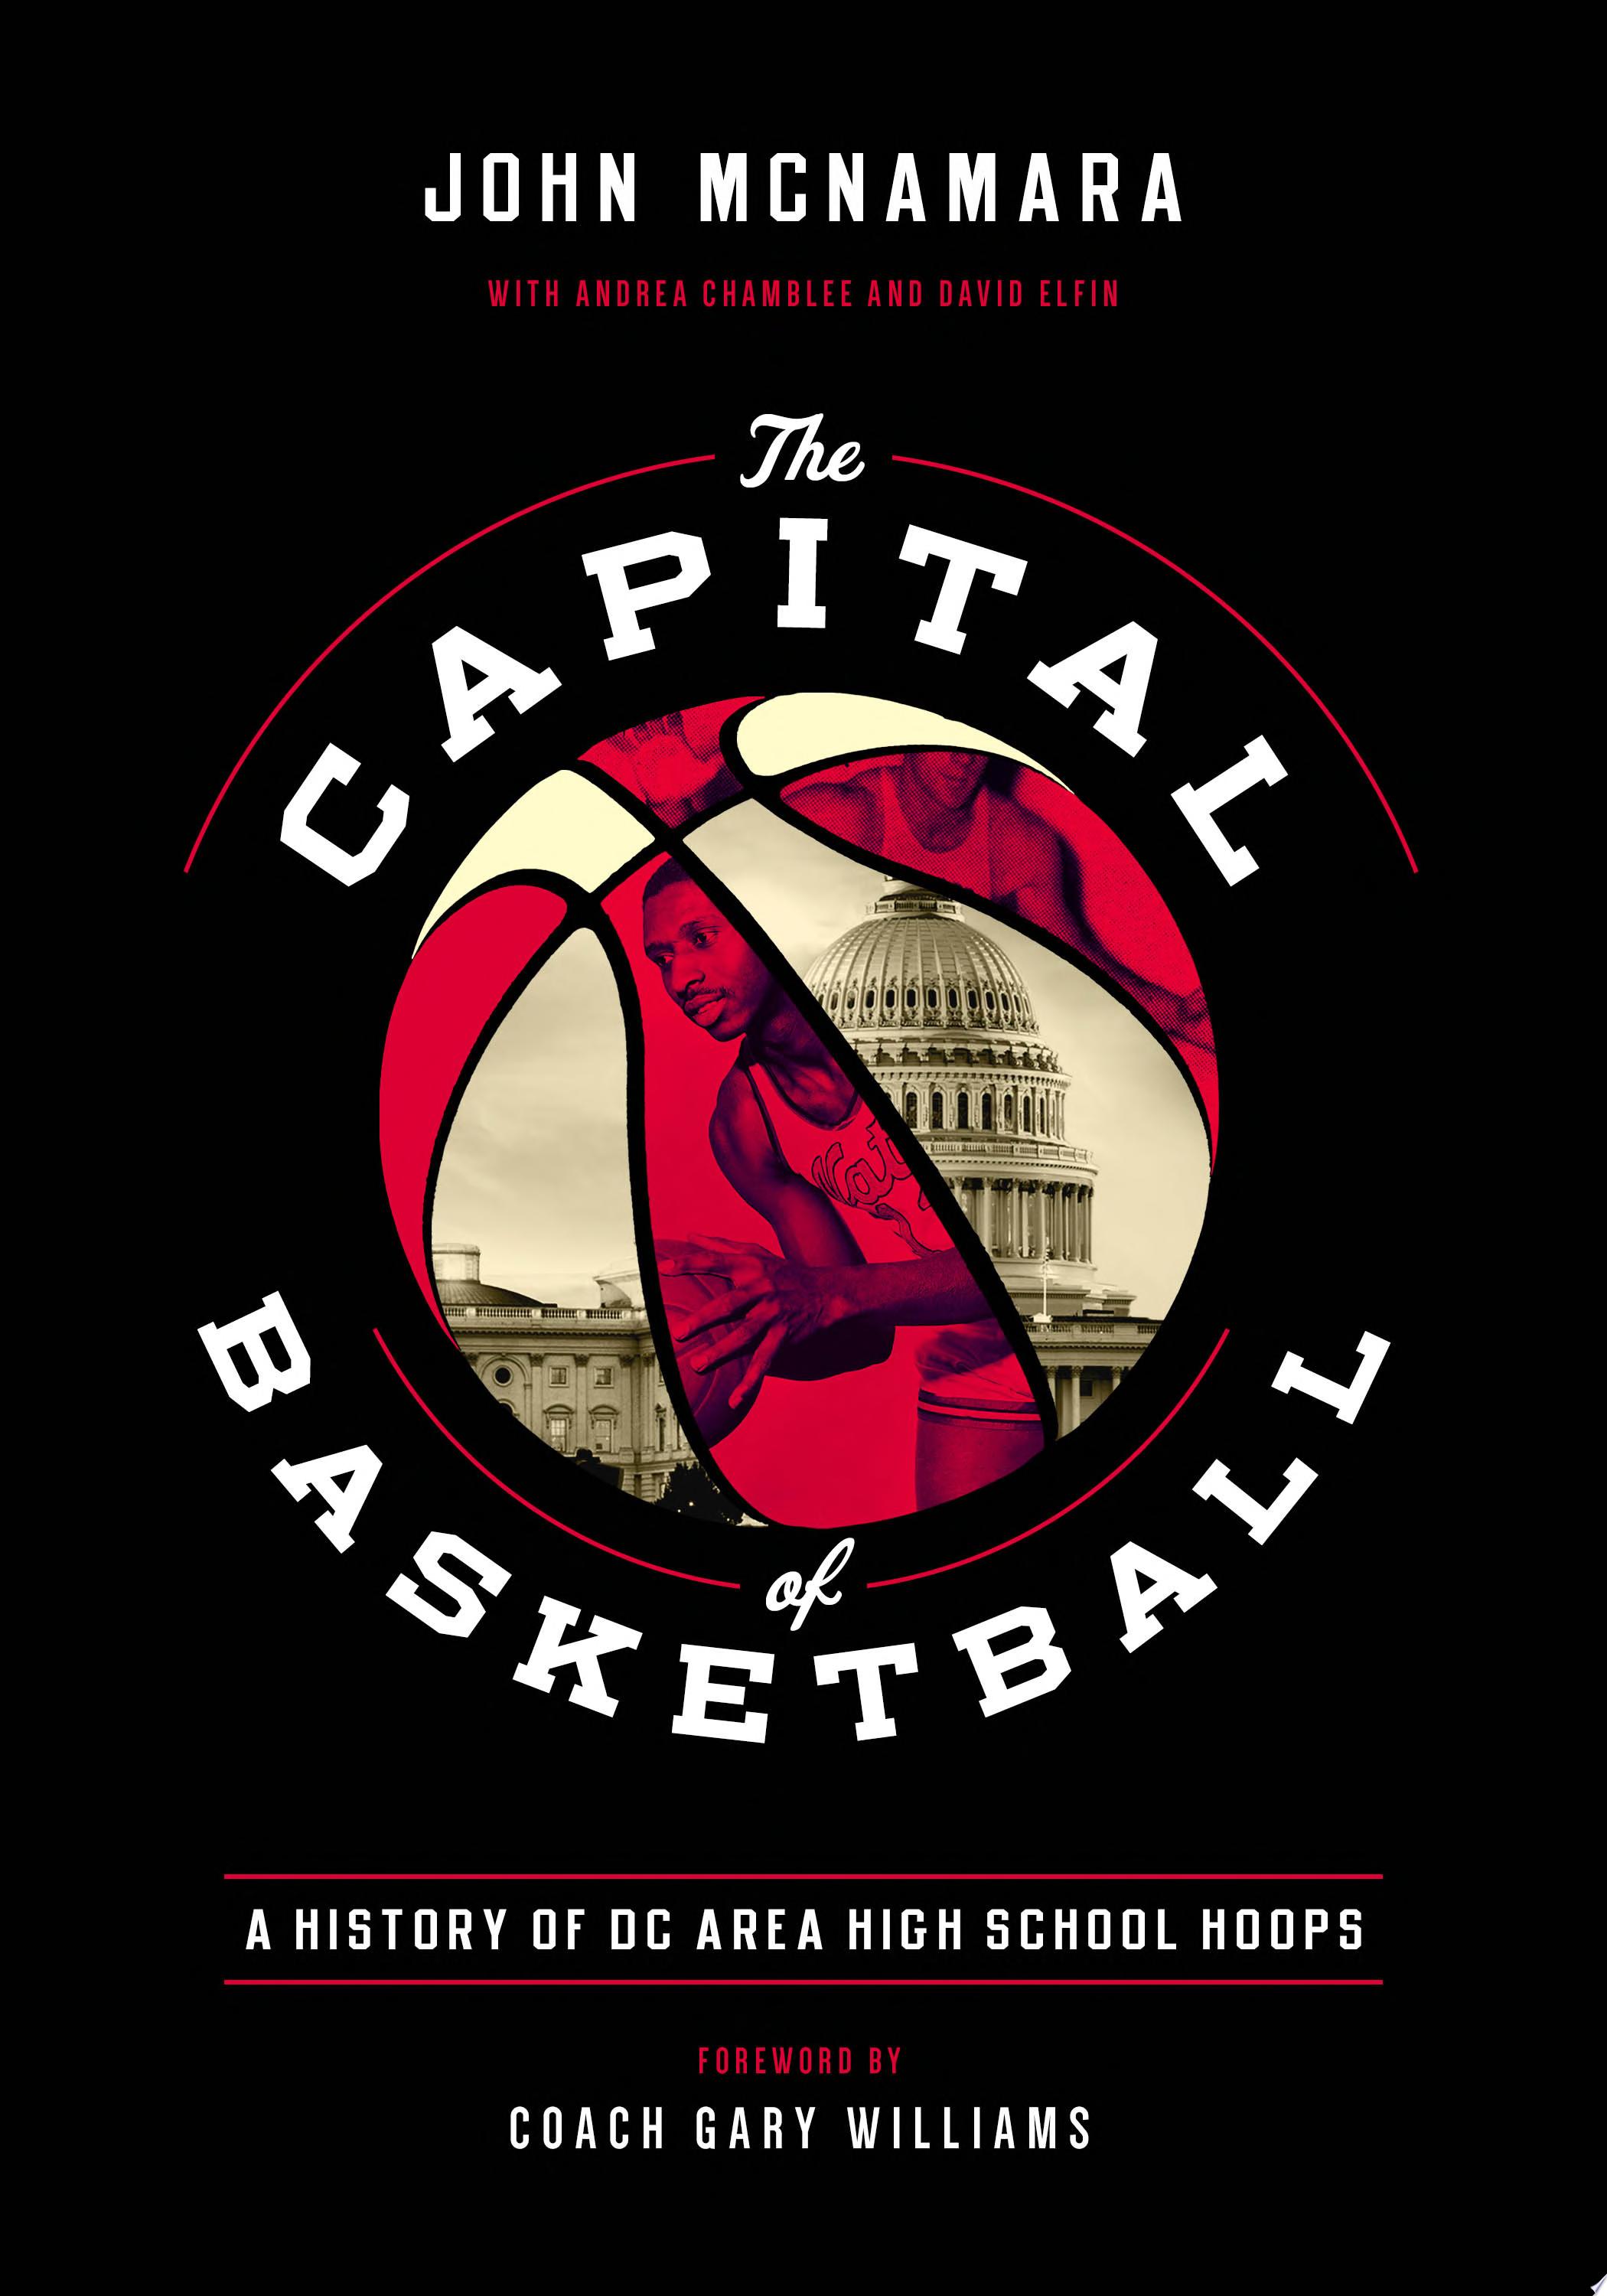 Image for "The Capital of Basketball"